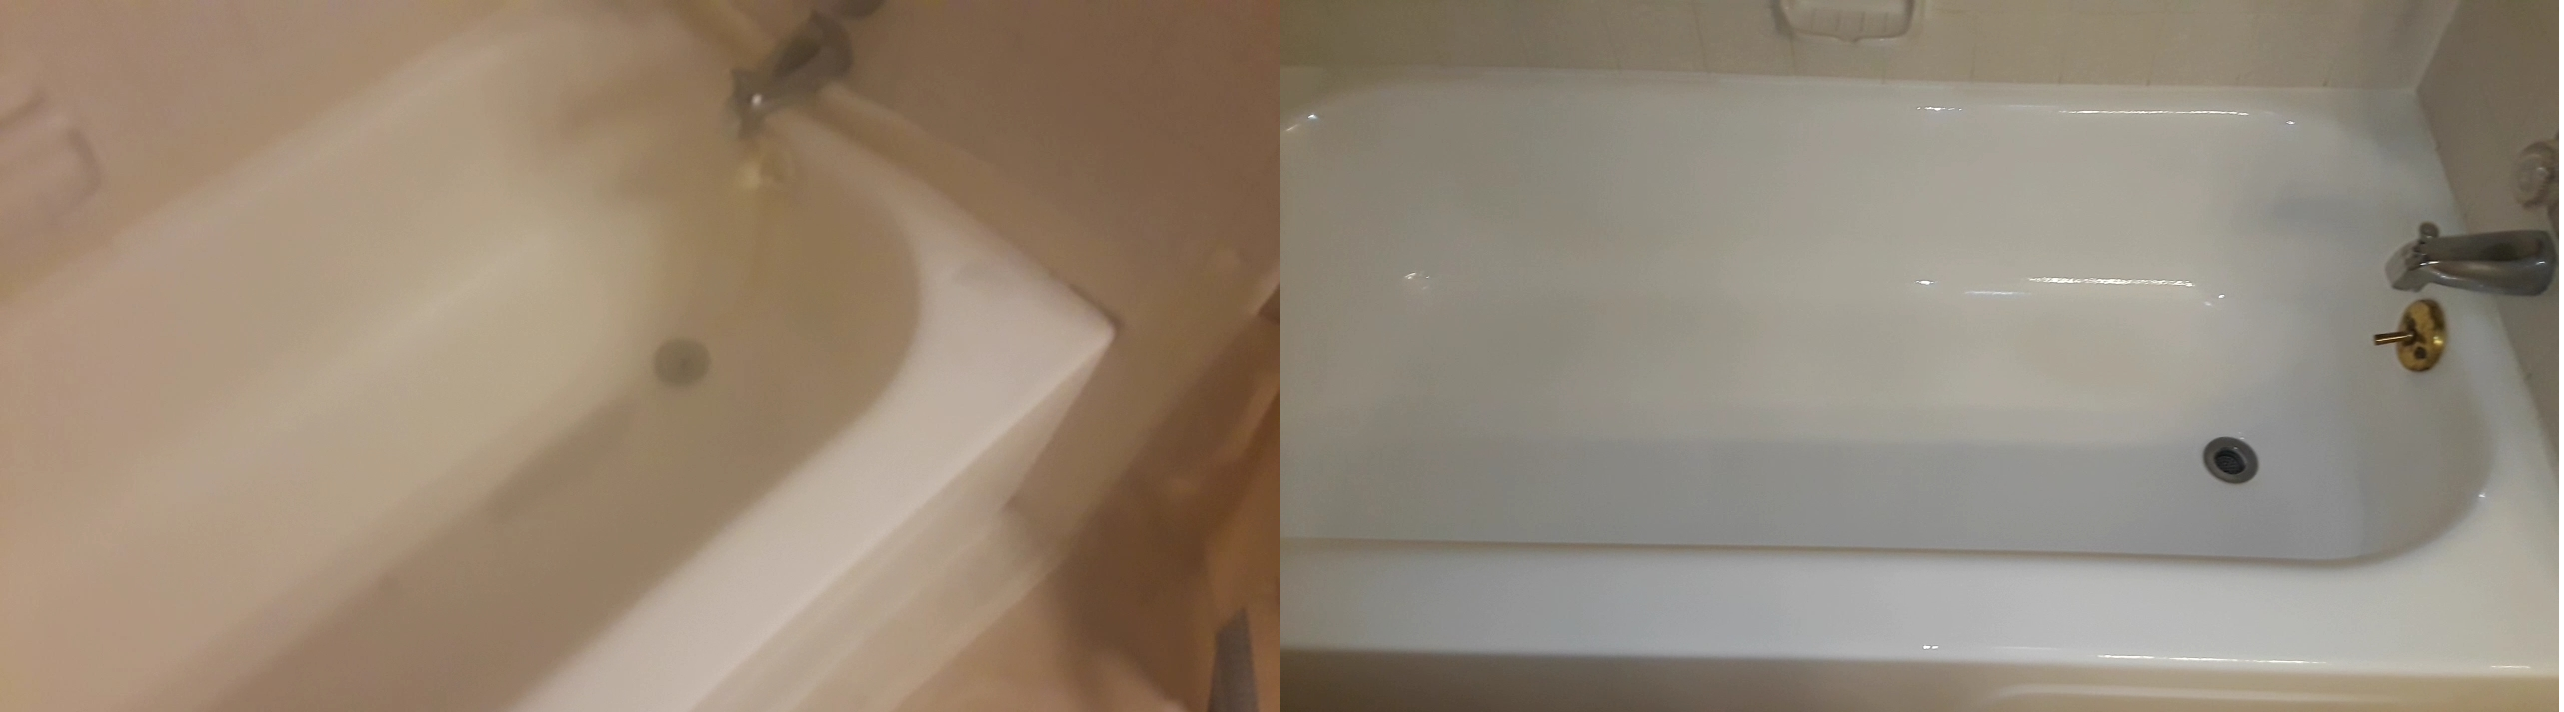 Dallas Bathtub Services before and after photo in Highland Park, TX.